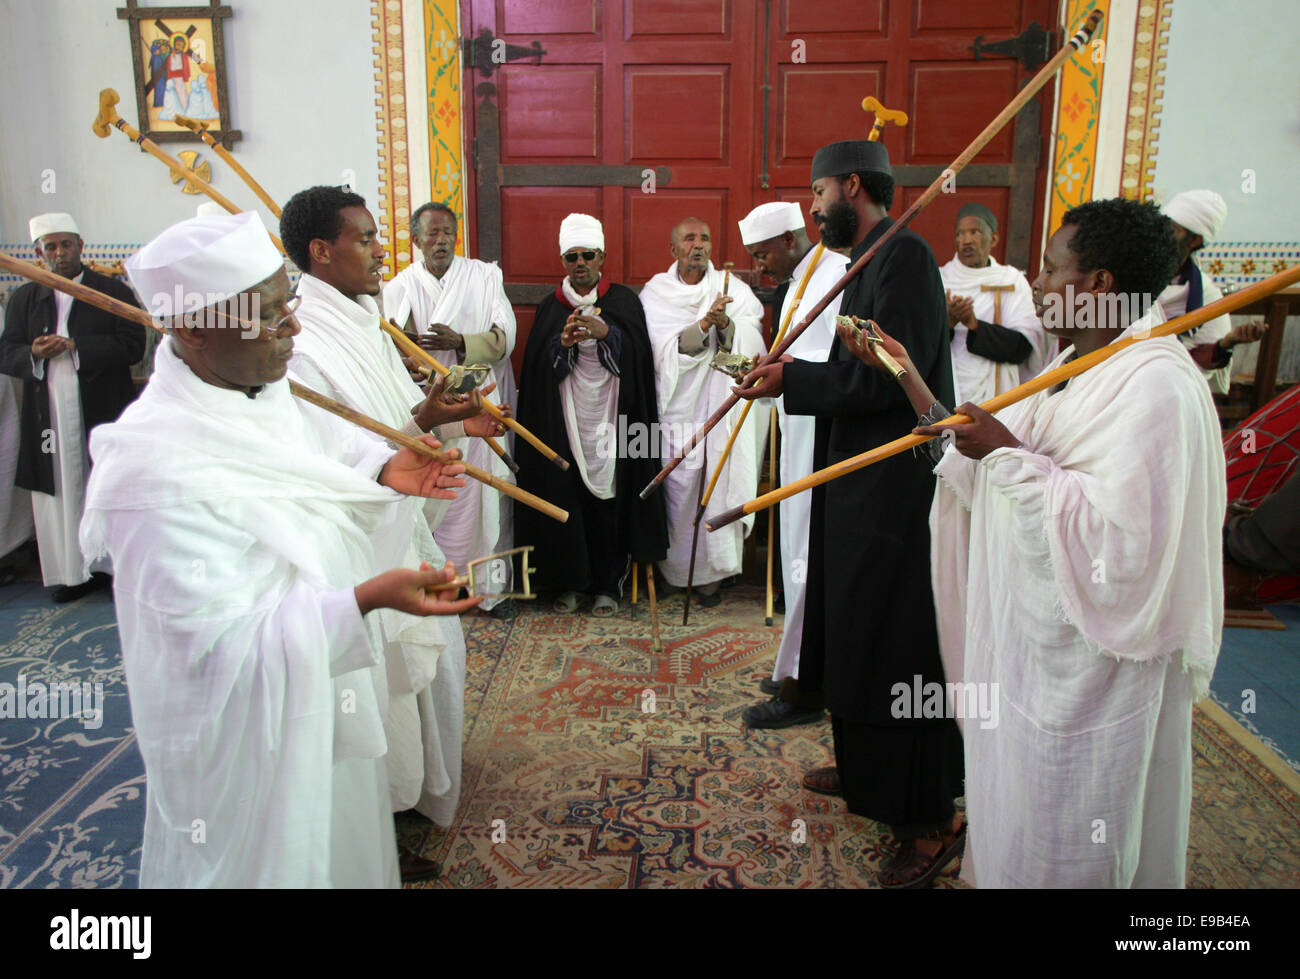 Priests with sticks sing during a vigil in the orthodox rite in the catholic Cathedral of the Holy Saviour, Adigrat, Ethiopia Stock Photo